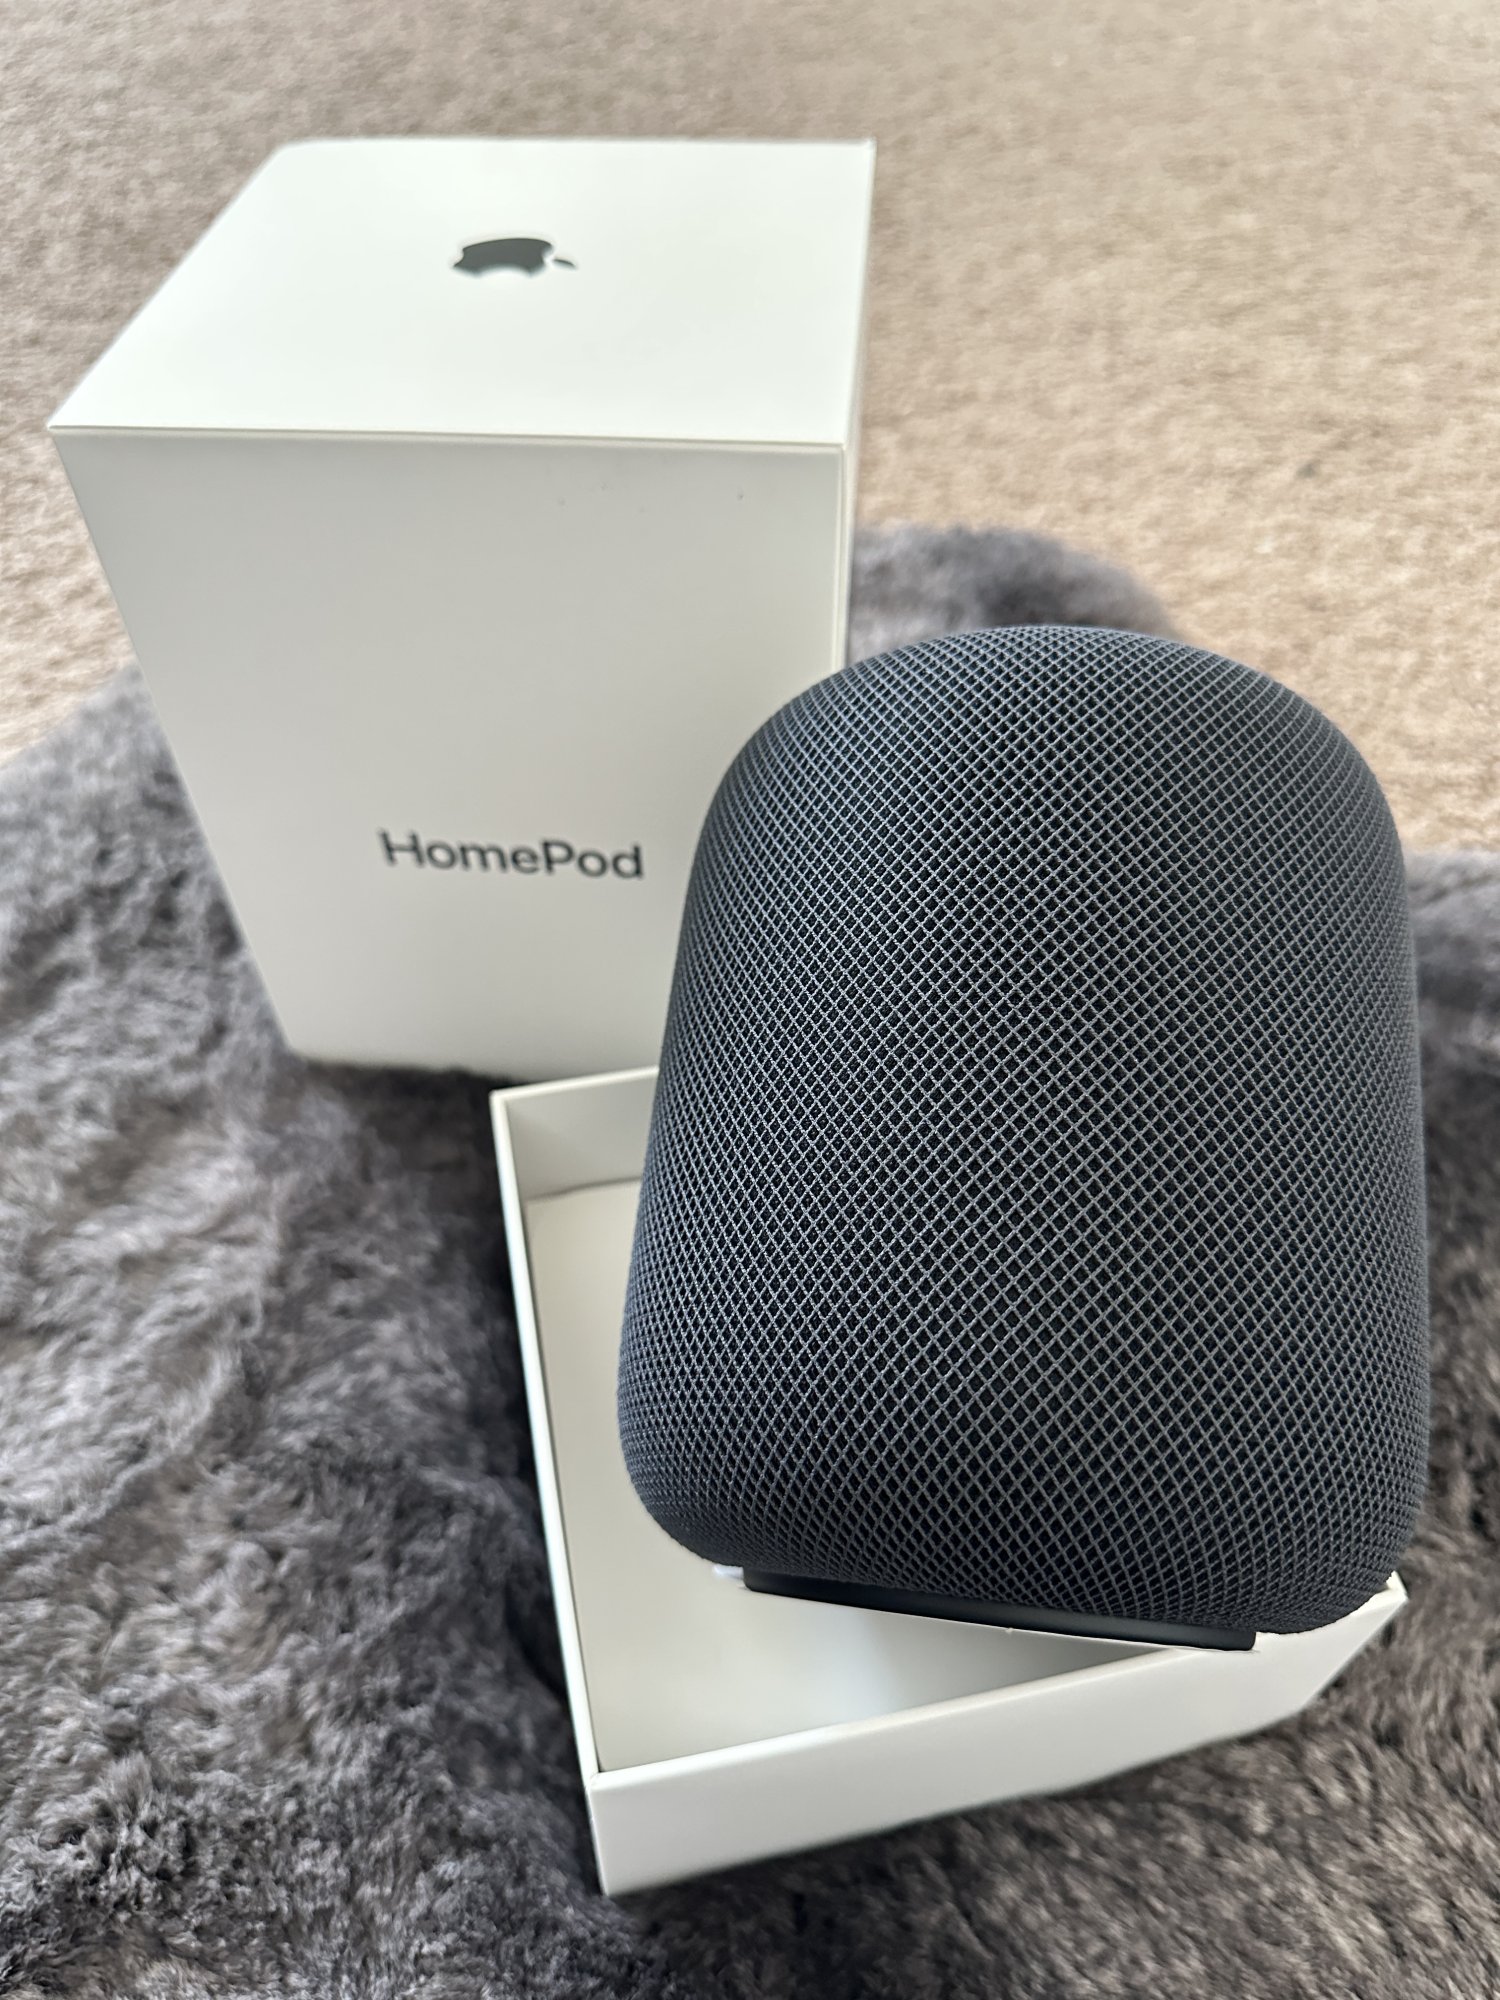 The HomePod 2 hits stores today, but it's strictly for hardcore